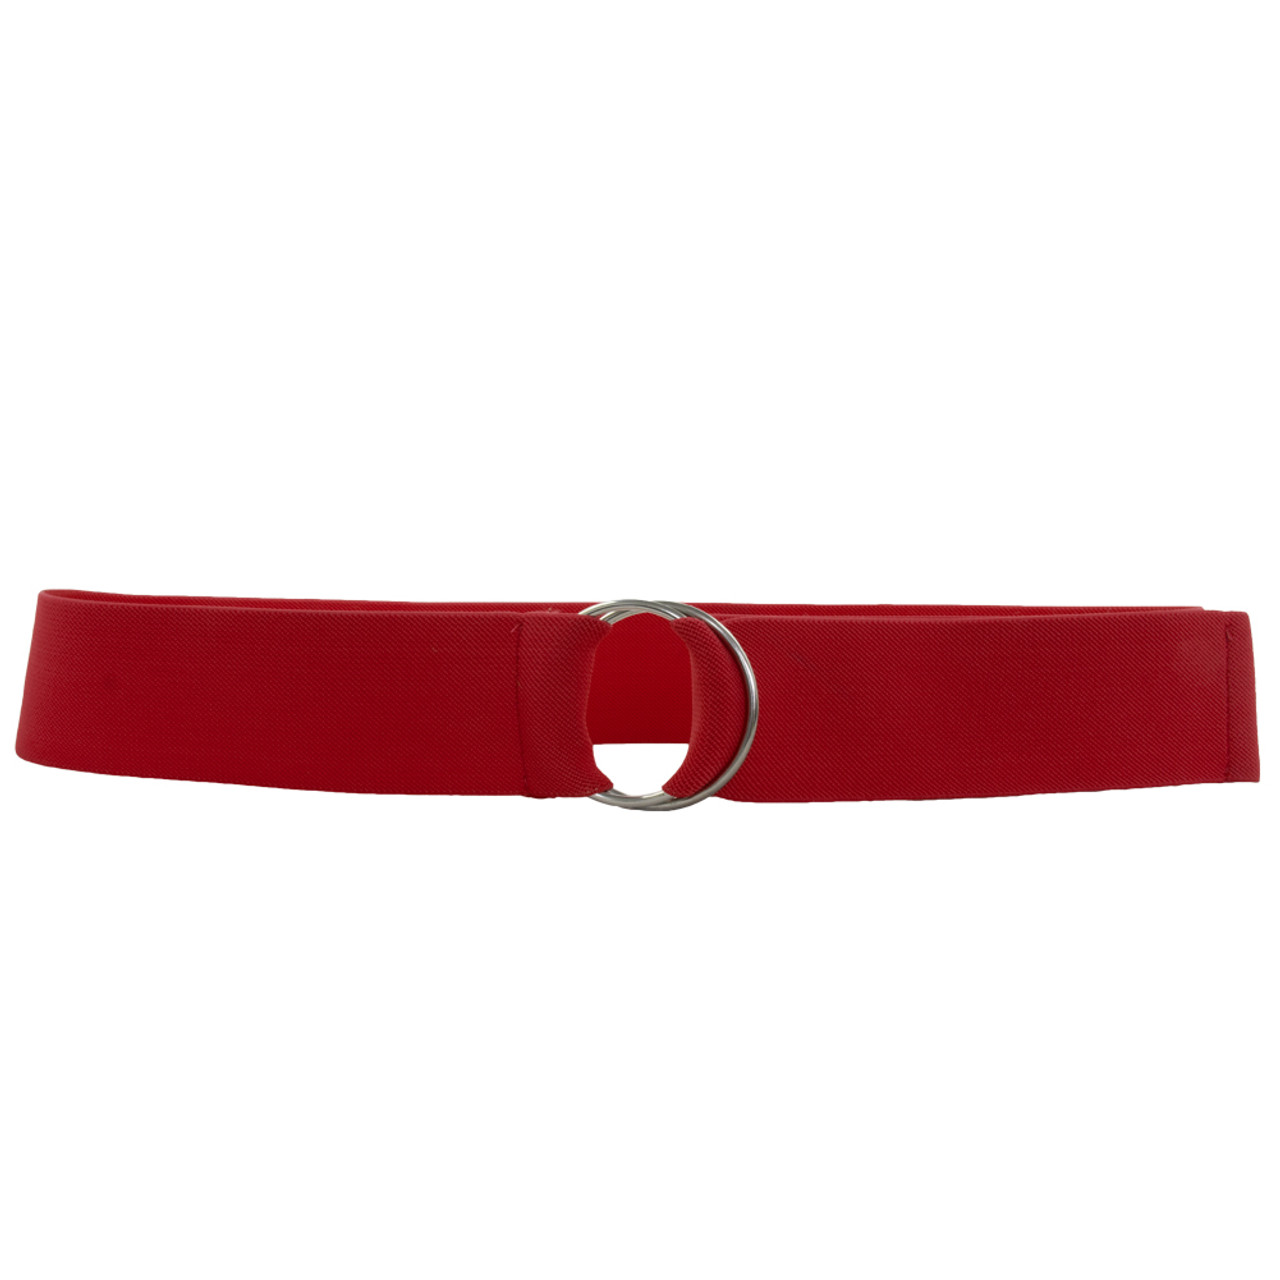 Stretch D-Ring Belt Burgundy 2685 - Private Island Party